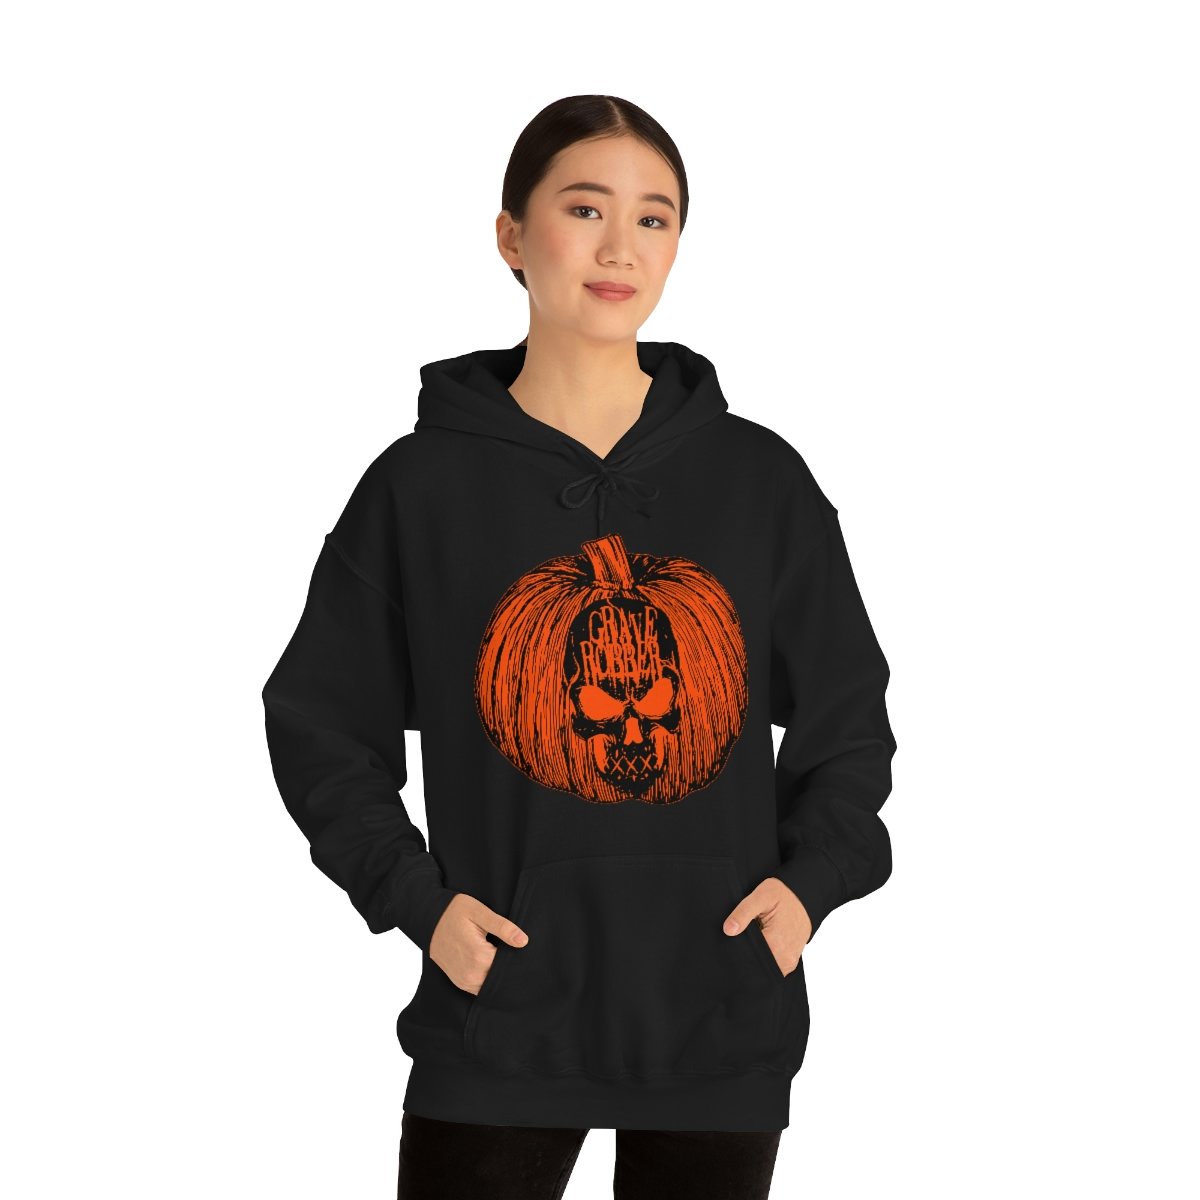 Grave Robber Pumpkin Limited Edition Pullover Hooded Sweatshirt